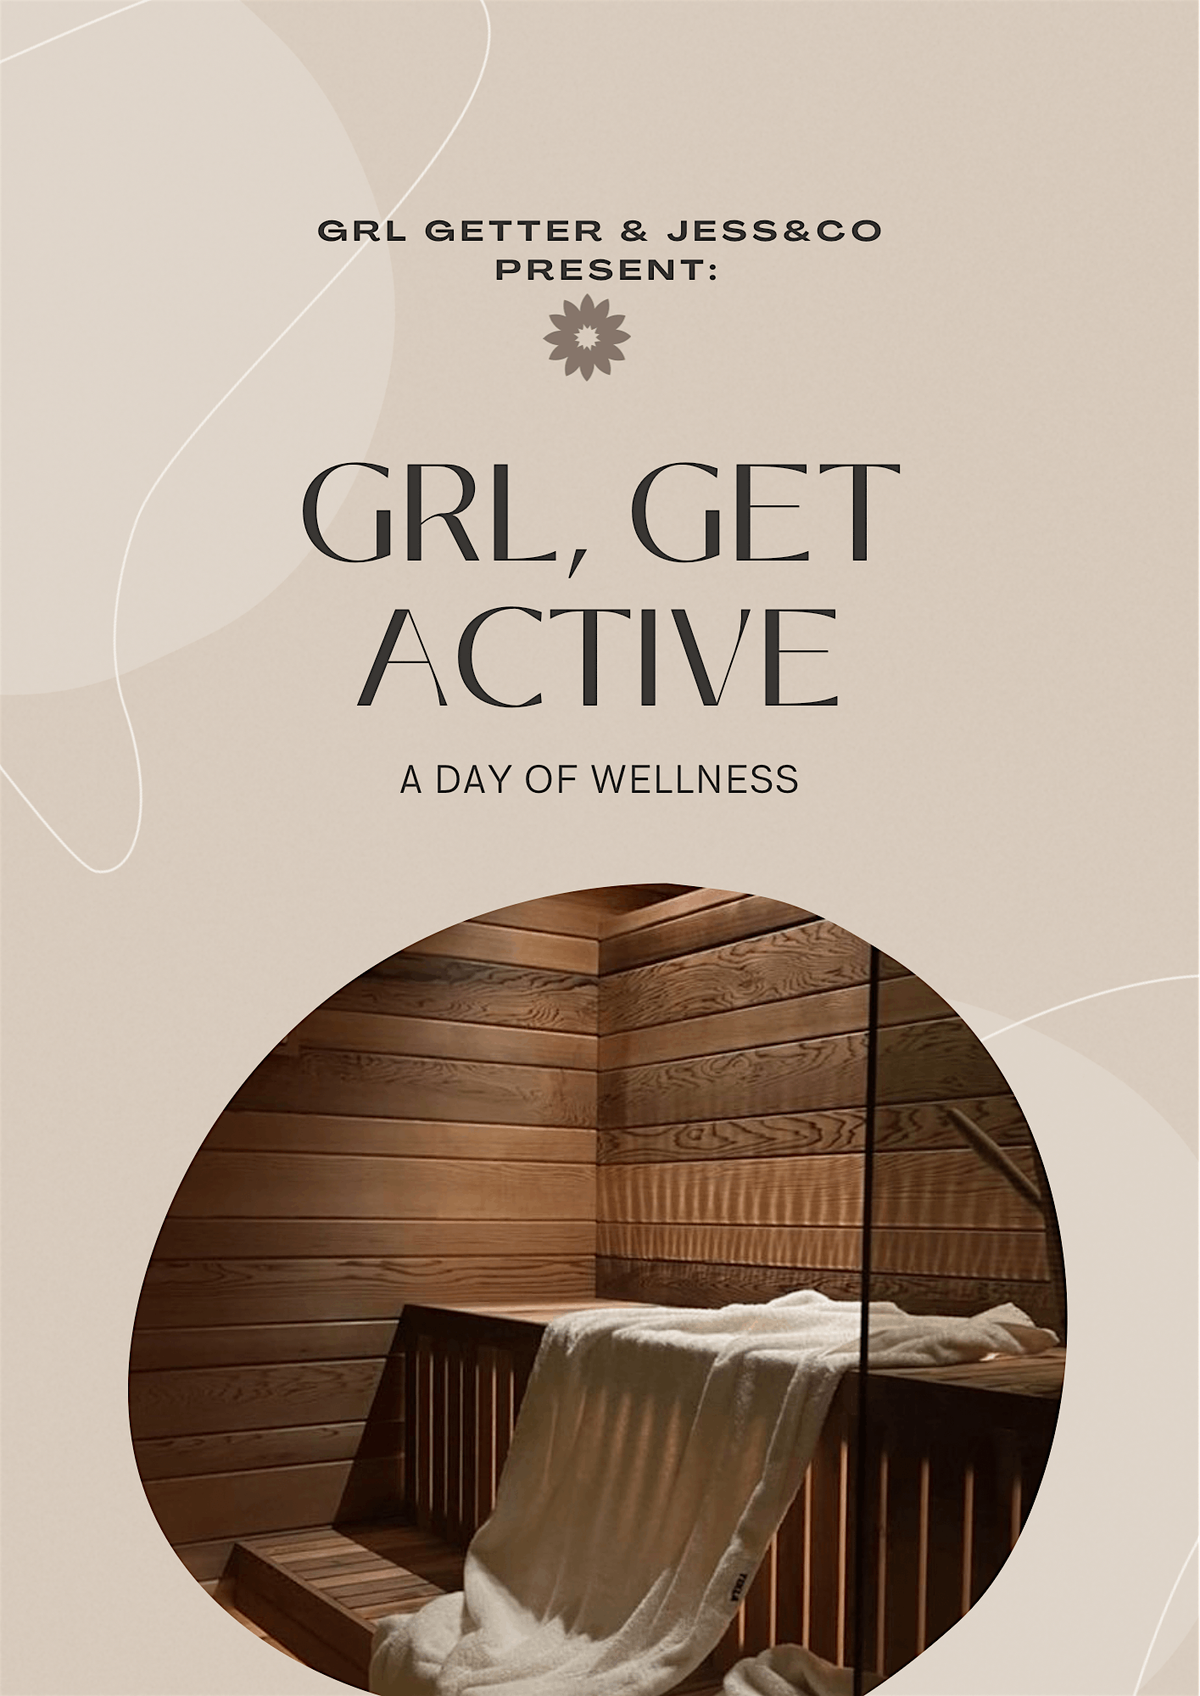 Grl, Get Active: A Day of Wellness